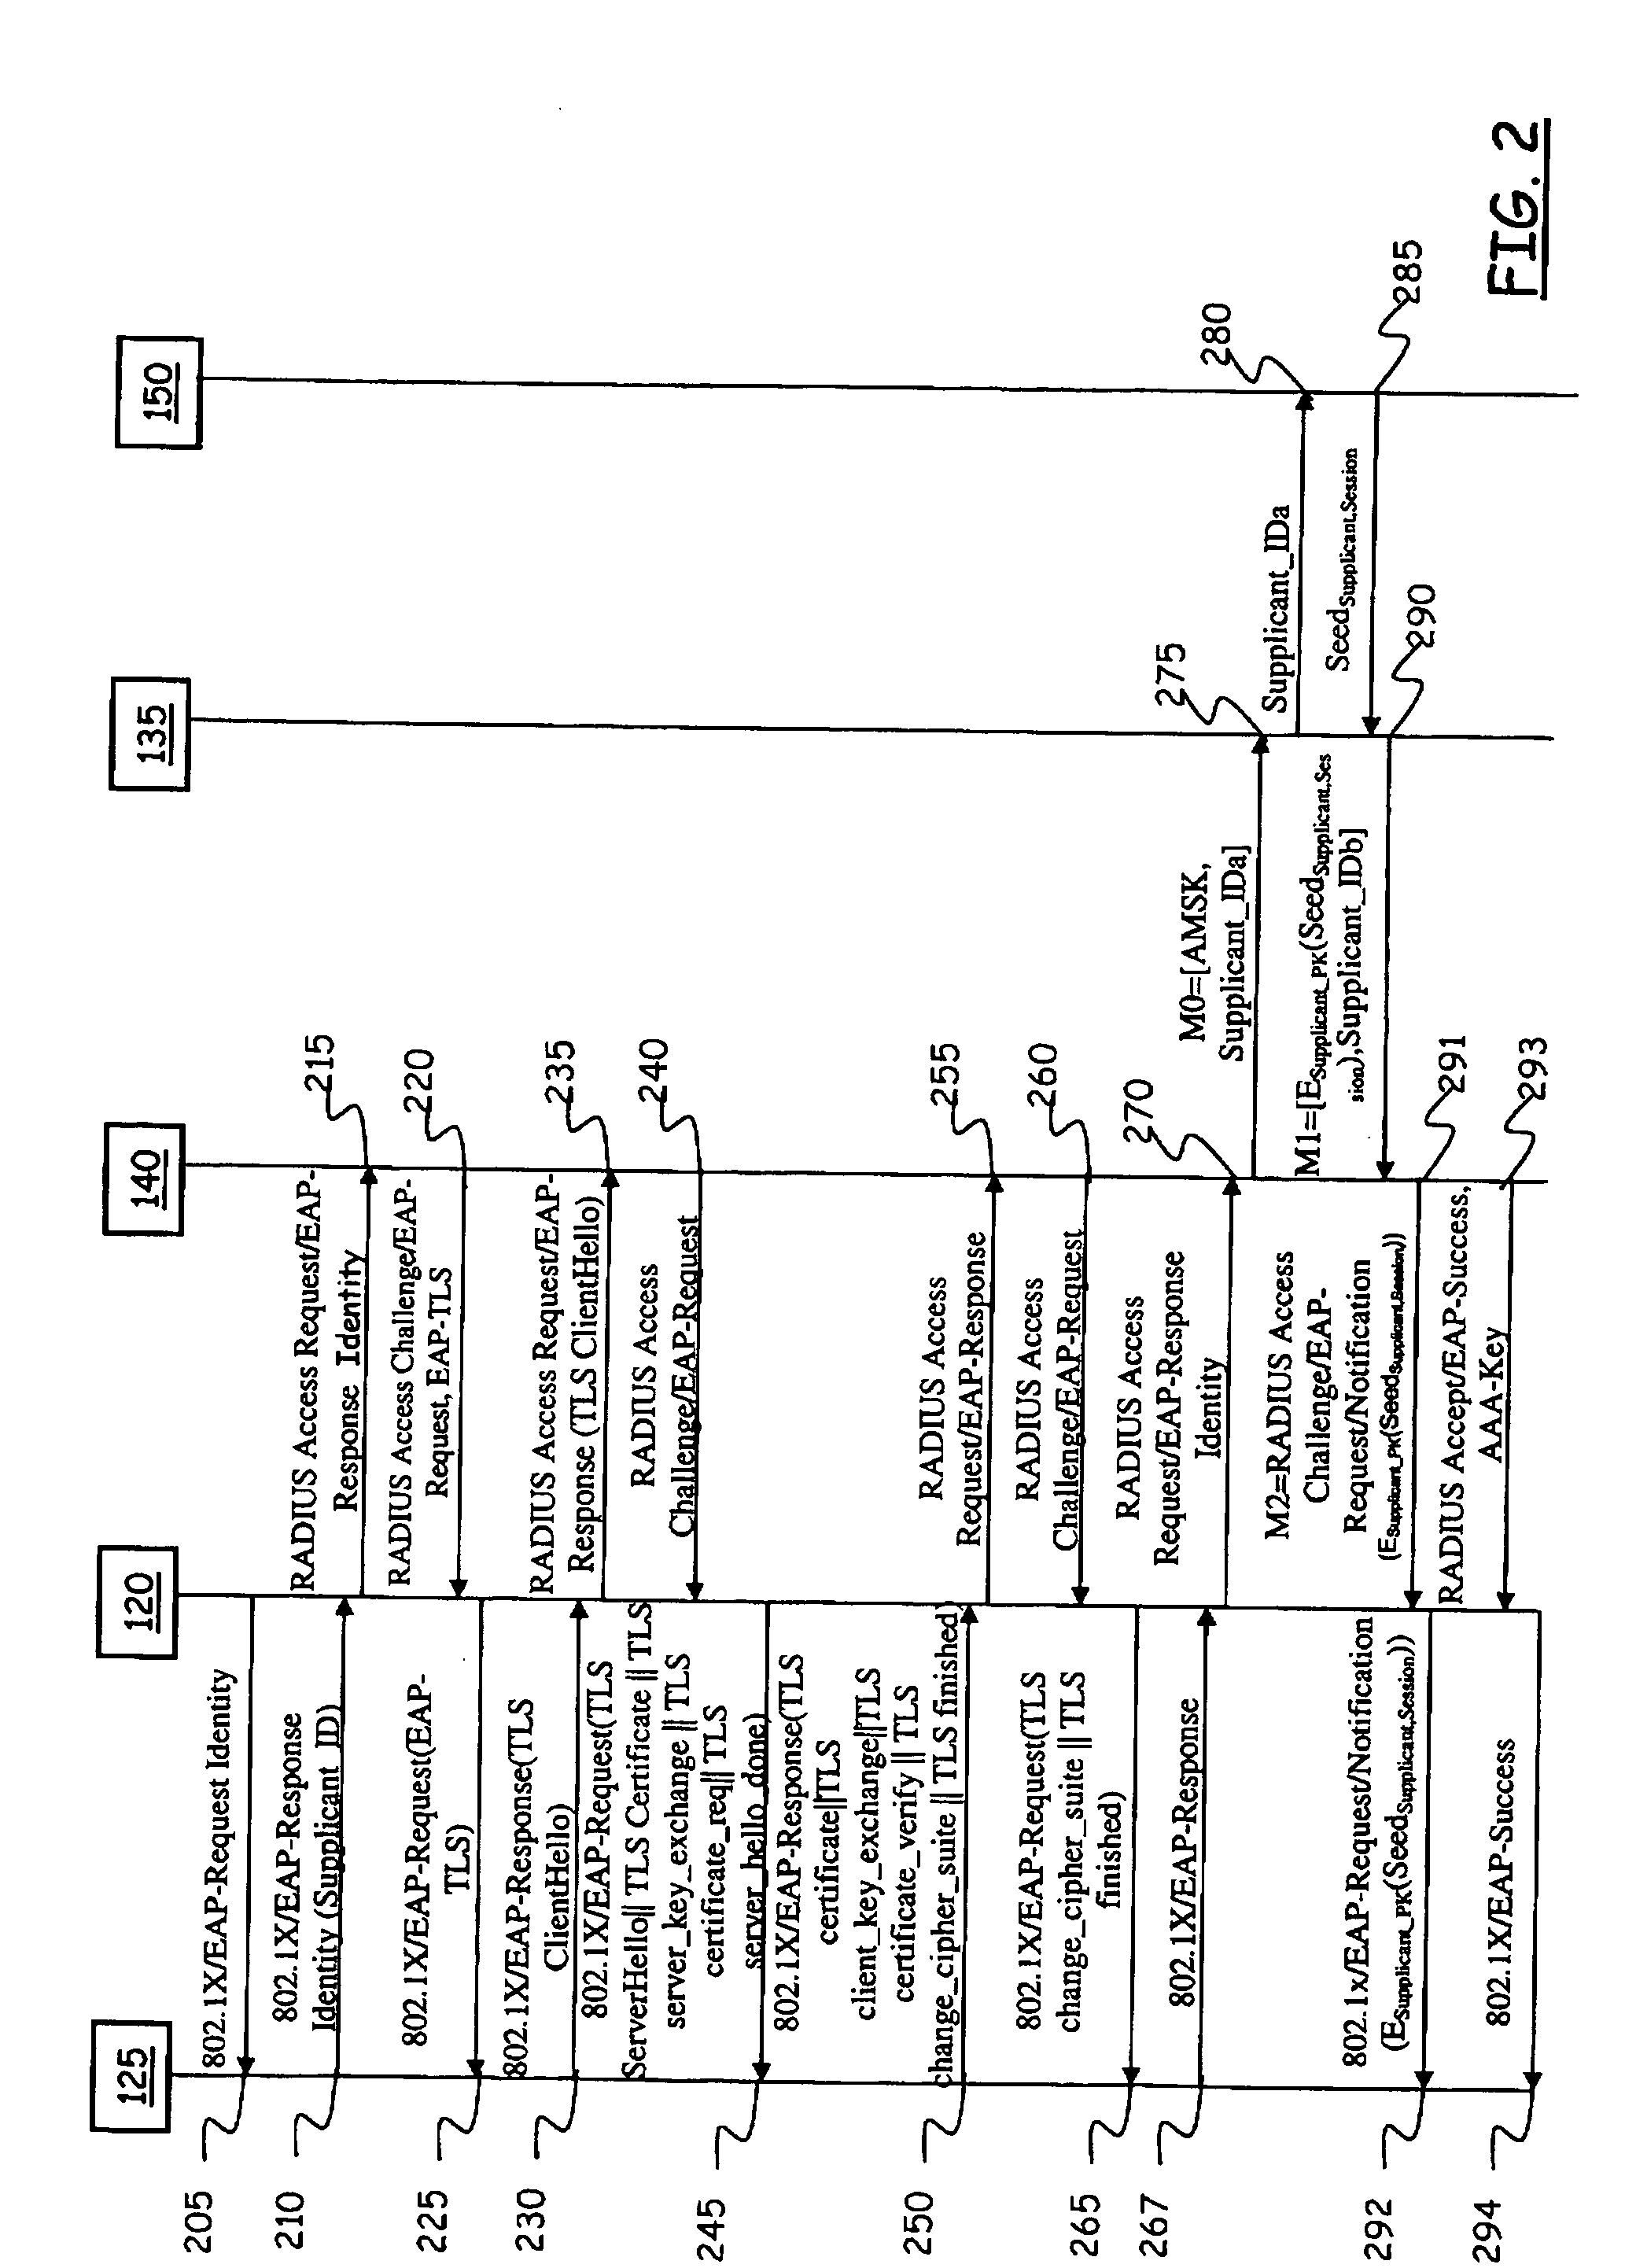 Method and System for Automated and Secure Provisioning of Service Access Credentials for On-Line Services to Users of Mobile Communication Terminals